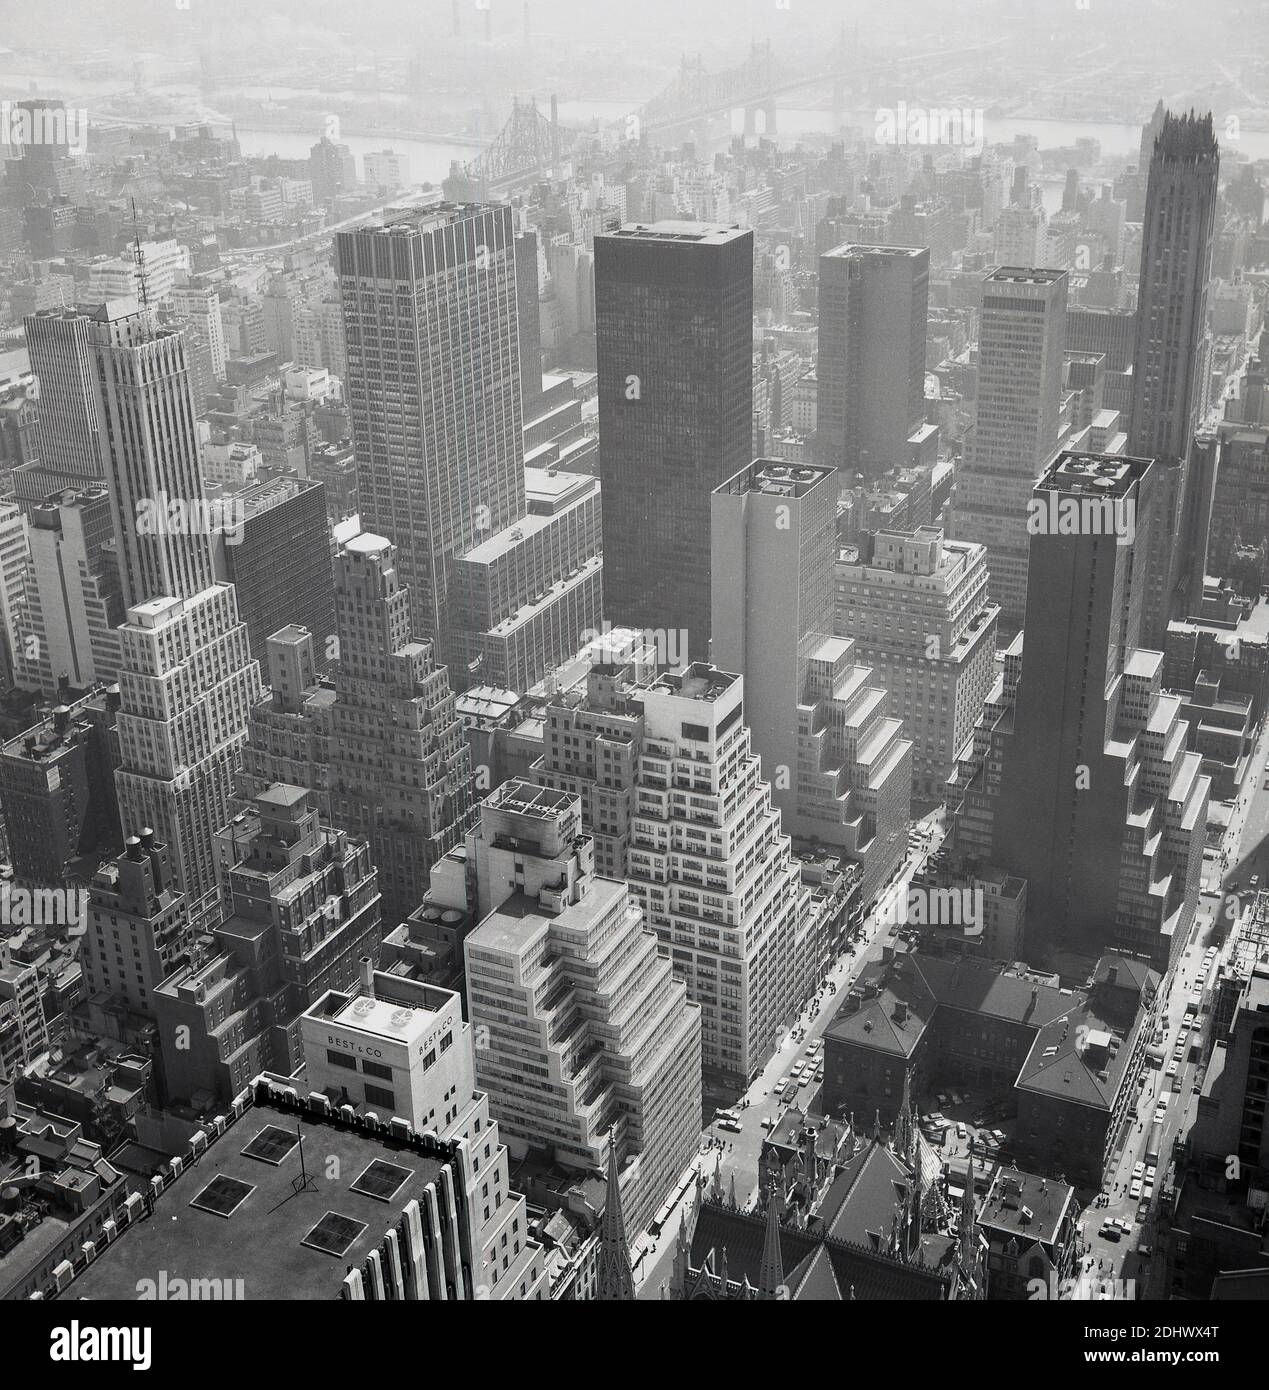 1960s, historical aerial view from this era over Manhattan, New York city, showing the density of the area, the tall buildings, the Tower blocks and skyscrapers and the Brooklyn Bridge in the far distance. Stock Photo